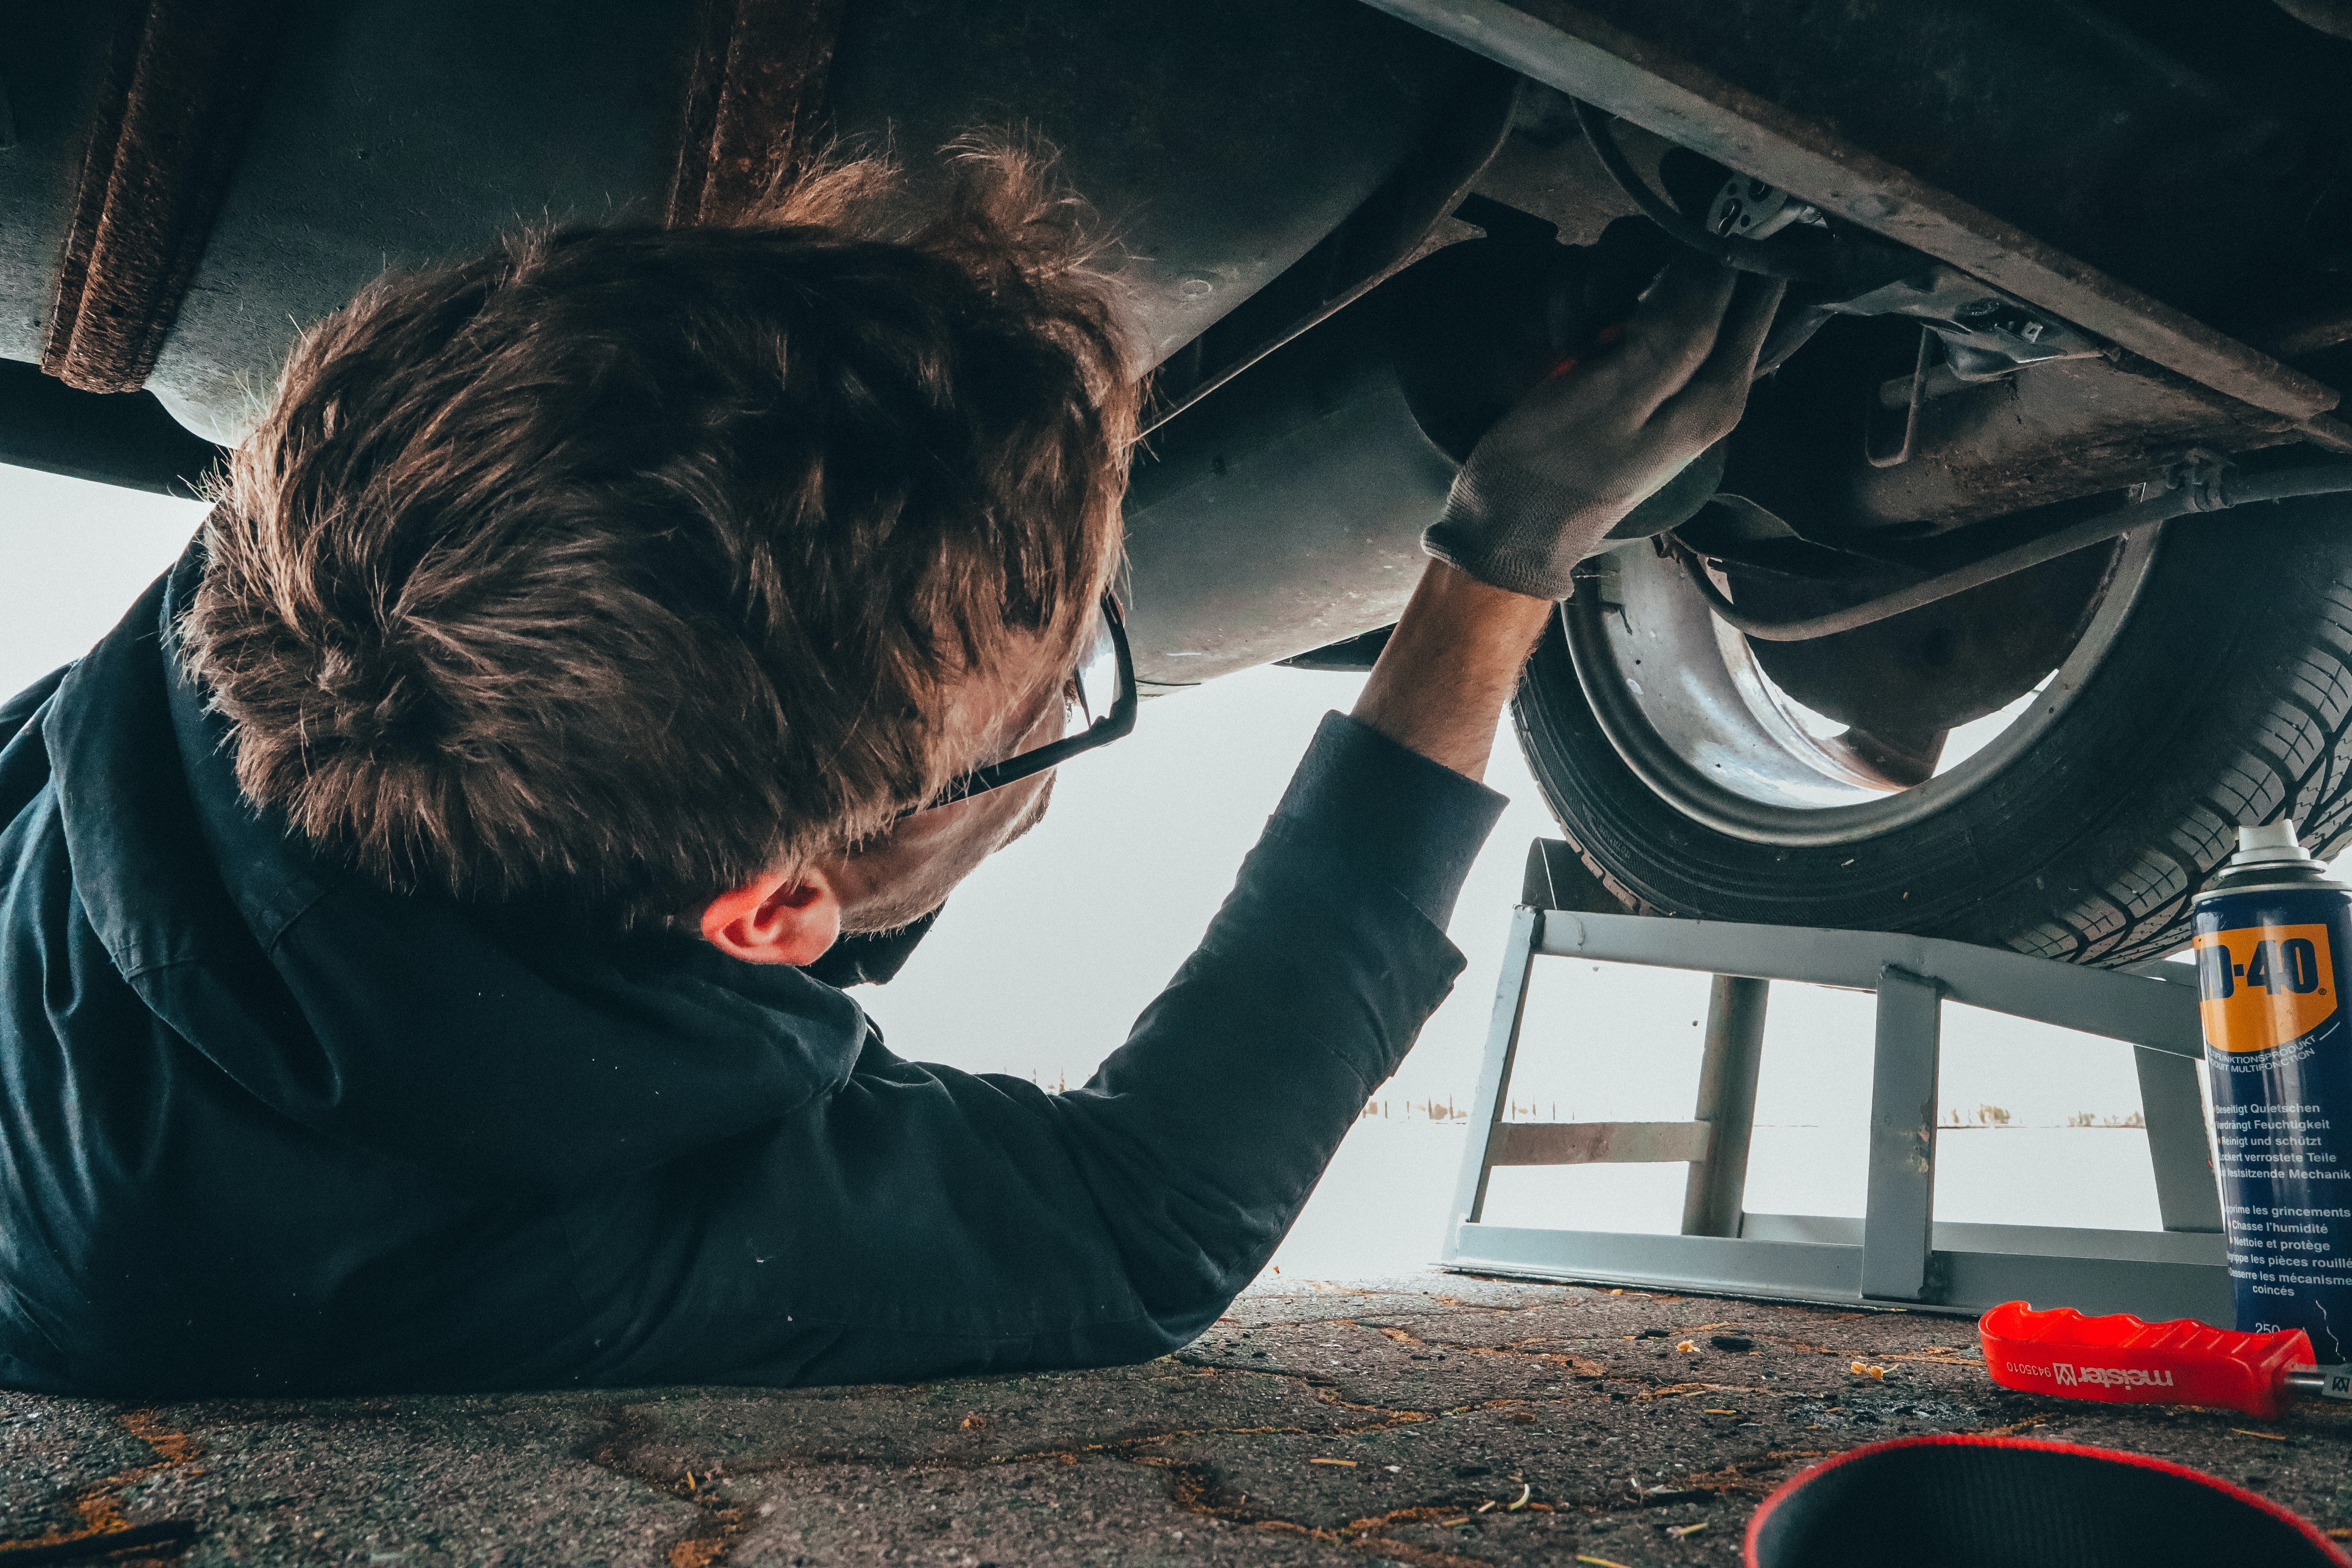 A Insider’s Look at Car Care & Safety